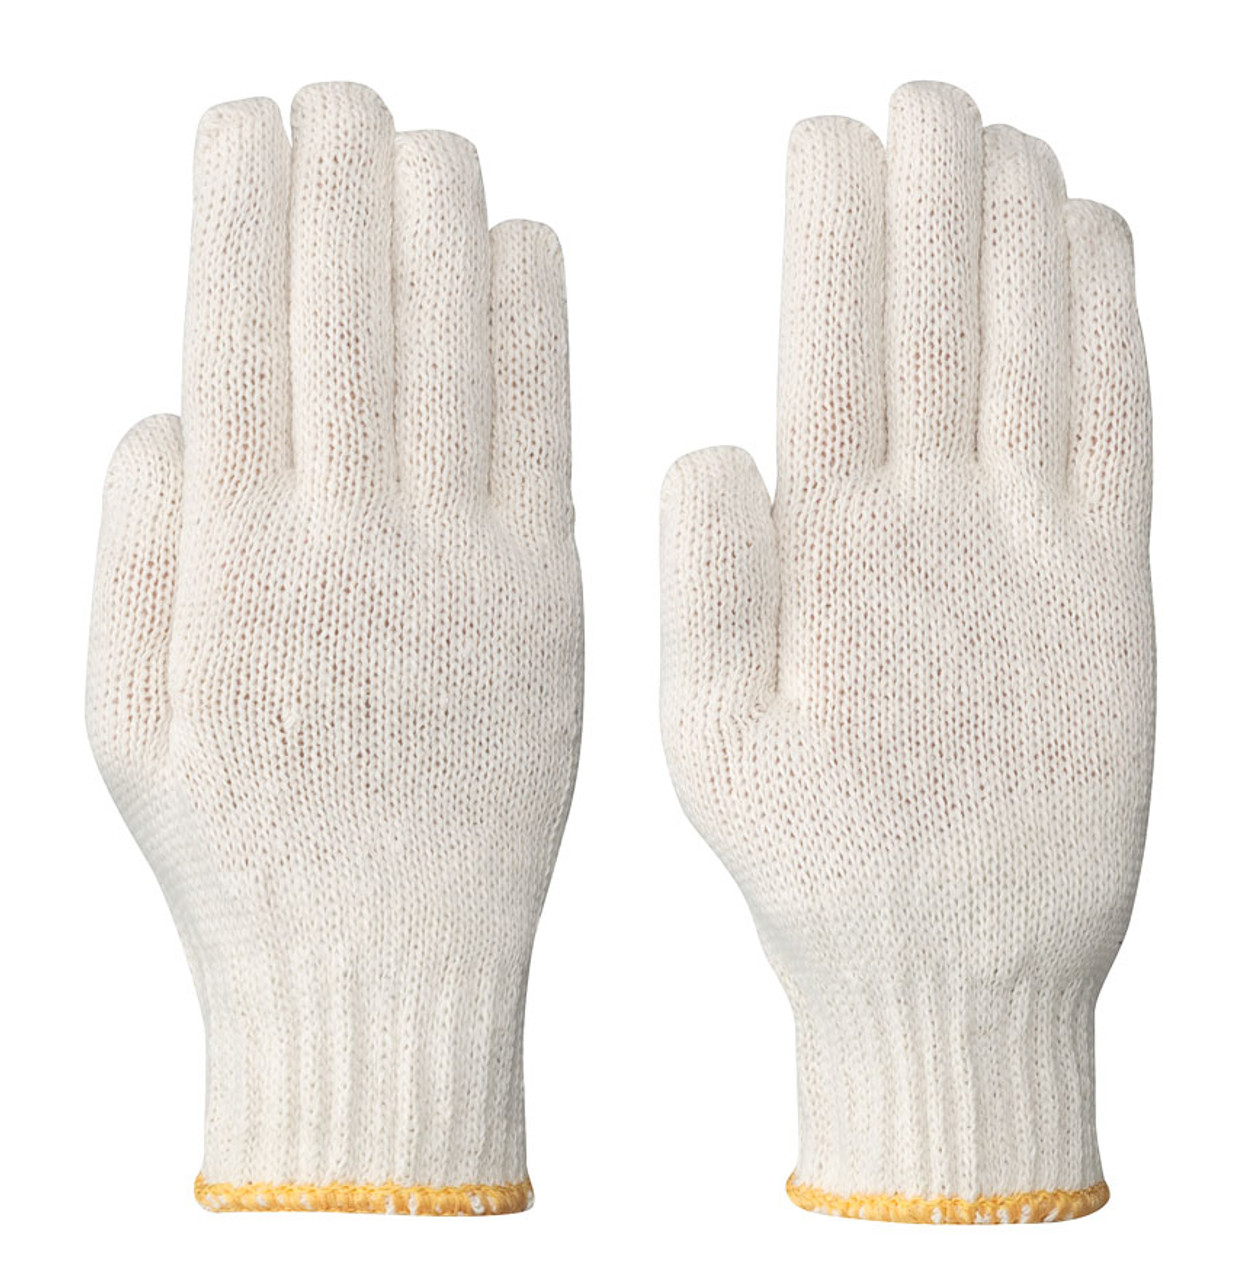 https://cdn11.bigcommerce.com/s-4208f/images/stencil/1280x1280/products/7605/9026/Knitted-Poly-Cotton-Glove-Liner-Natural-Pioneer-541__58539.1675721148.jpg?c=2